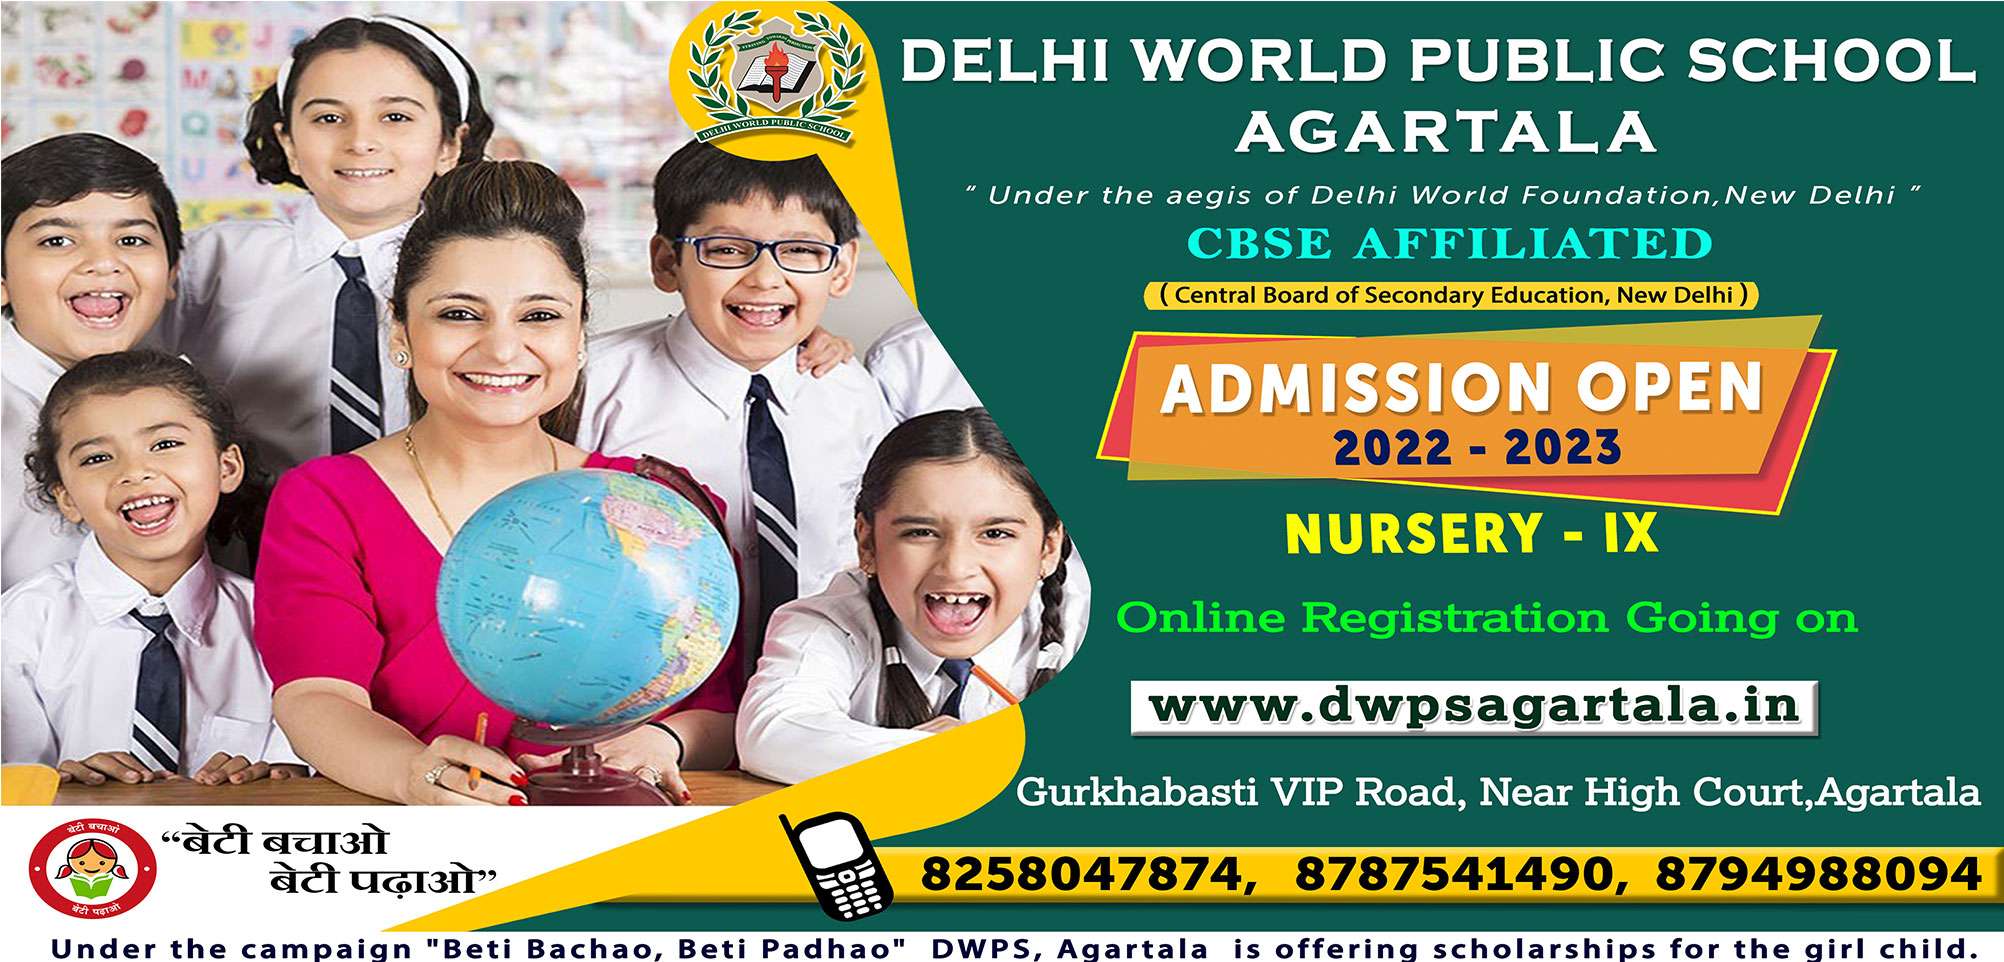 Admissions for 2022-23